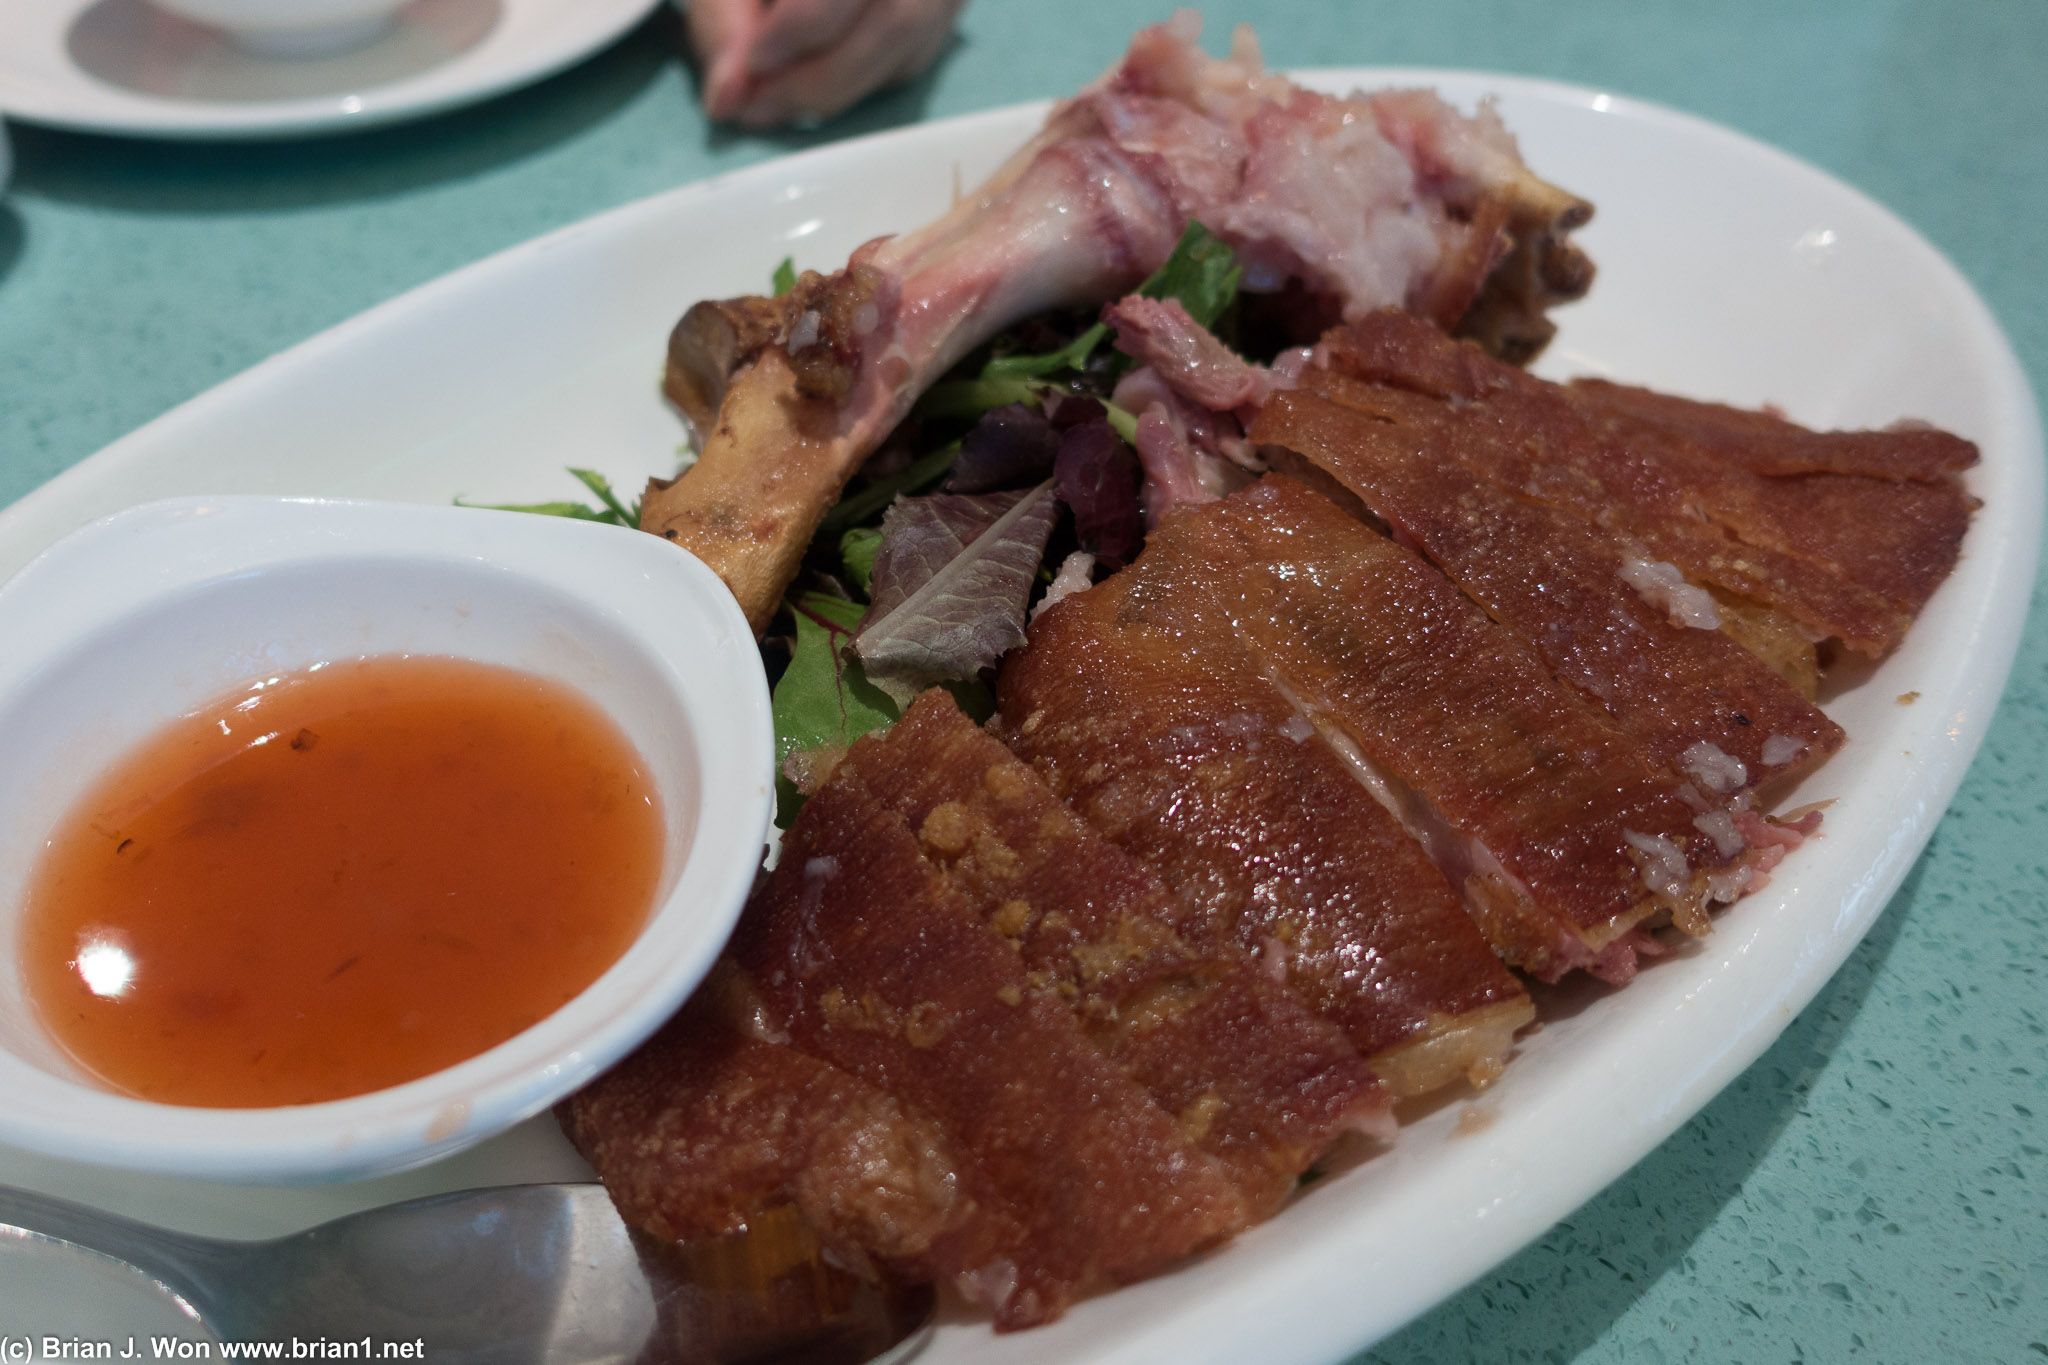 Pork knuckle. People rave about it. It was good but not up to the hype.